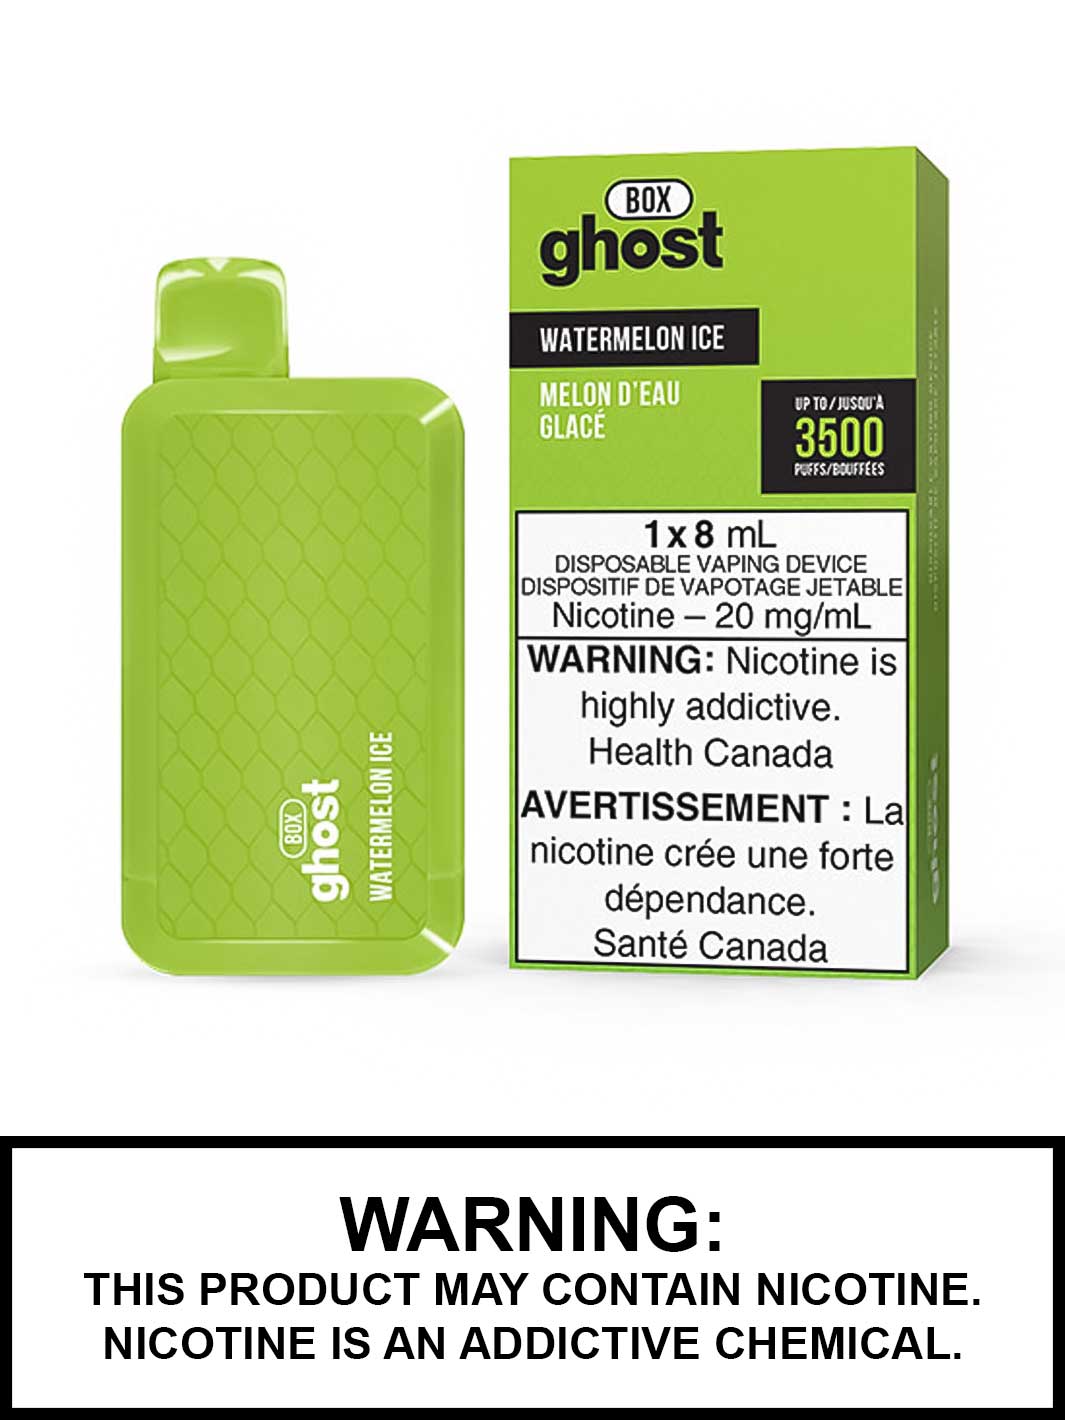 Watermelon Ice Ghost Box Disposable Vape, Ghost Box Vape, Ghost Vape, Vape360 Canada